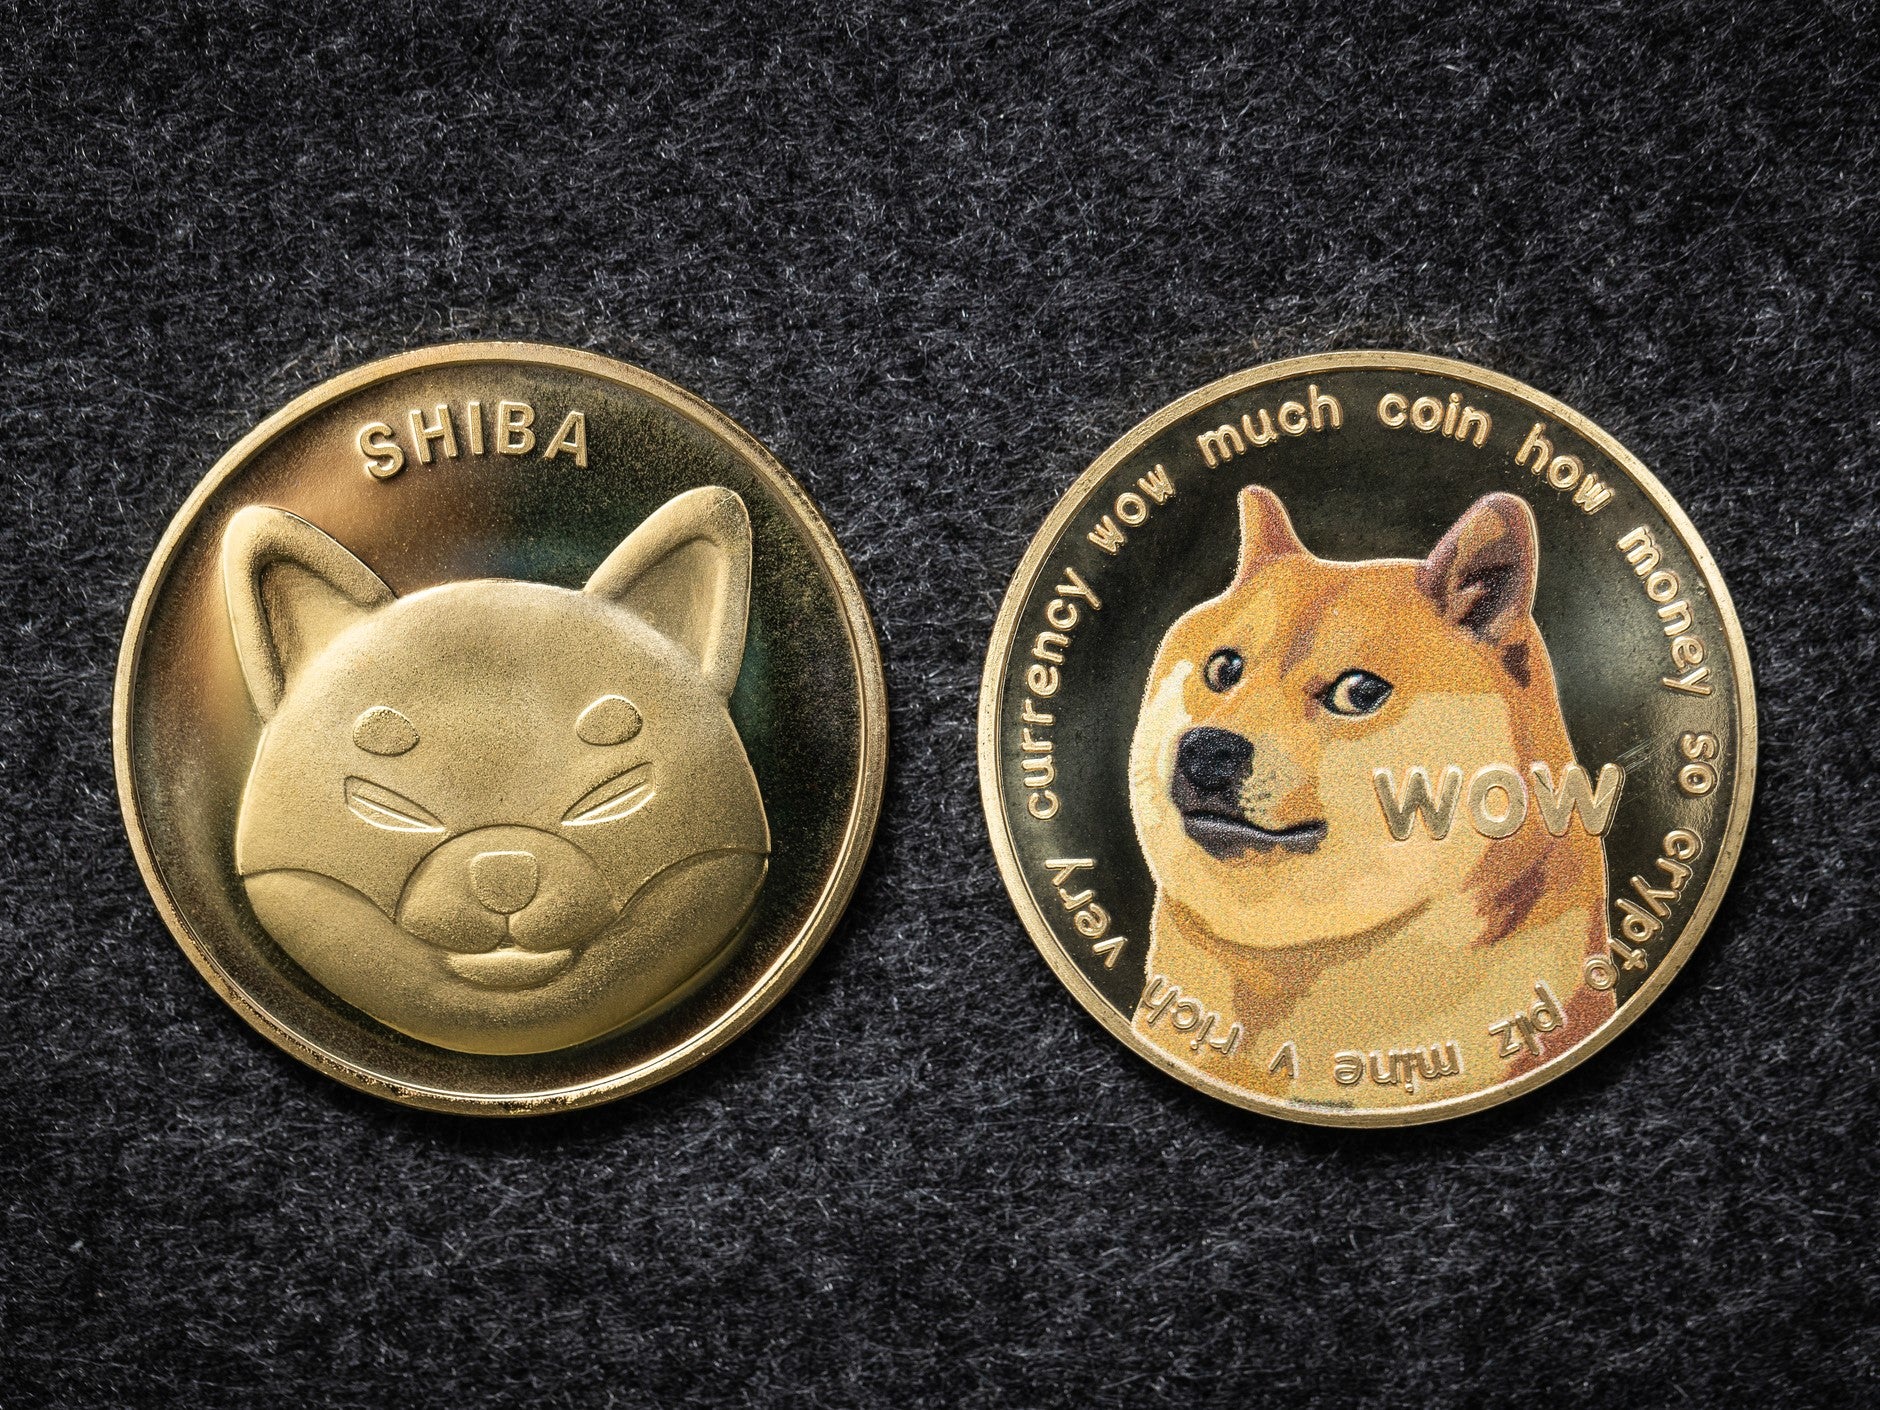 Dogecoin surged in popularity and price in 2021 after high-profile endorsements from the likes of Elon Musk